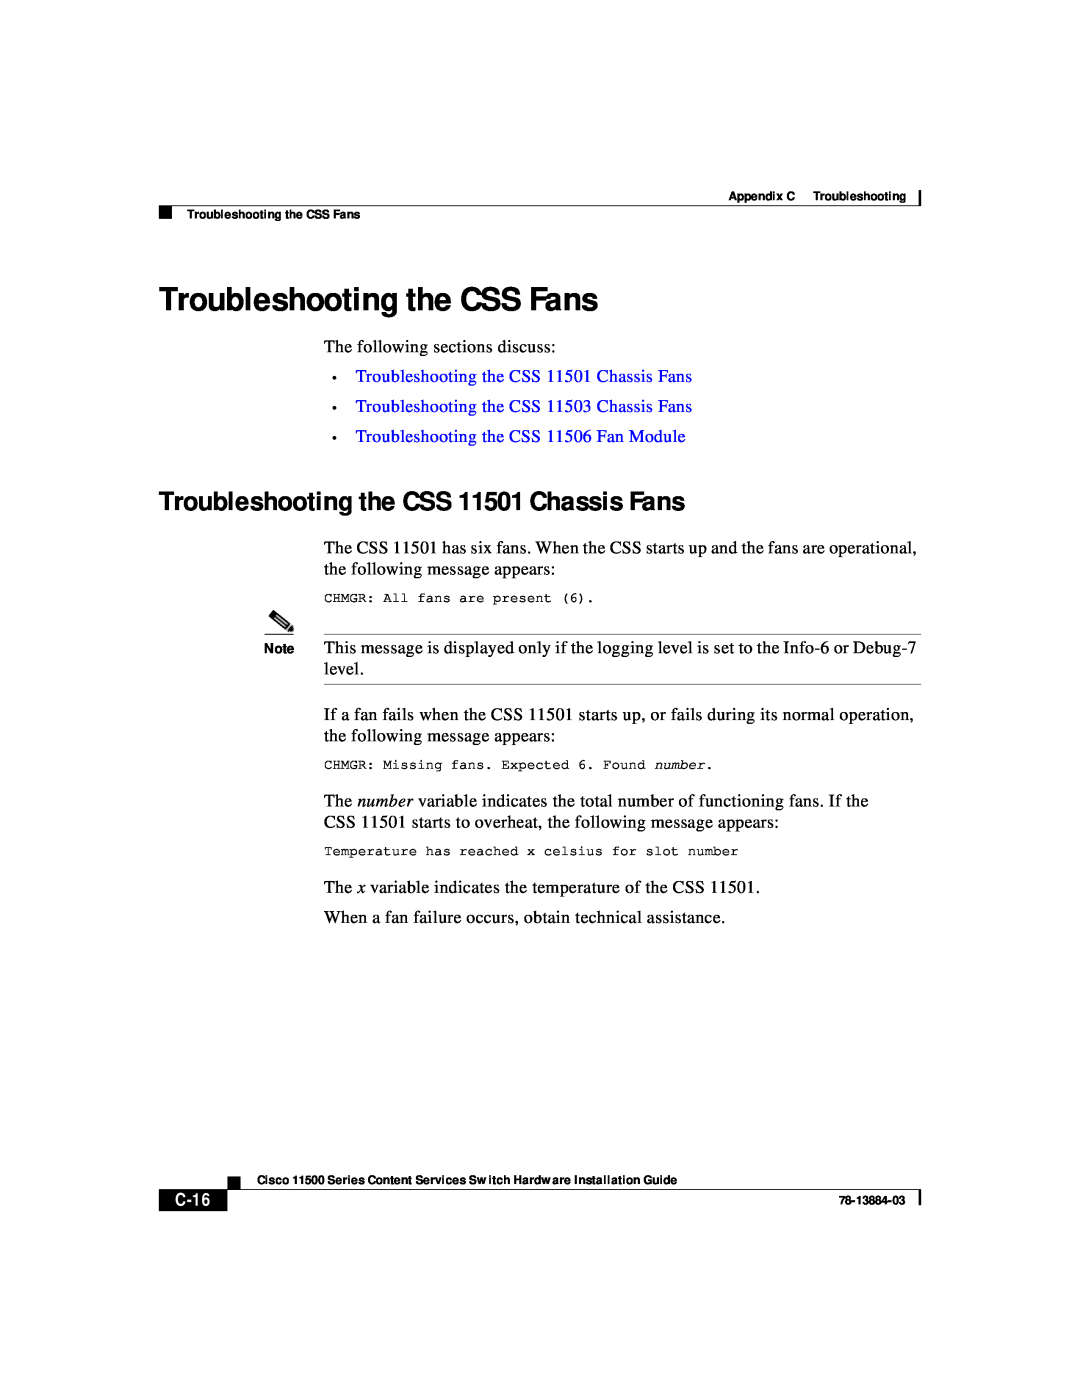 Cisco Systems 11500 Series manual Troubleshooting the CSS Fans, Troubleshooting the CSS 11501 Chassis Fans, C-16 